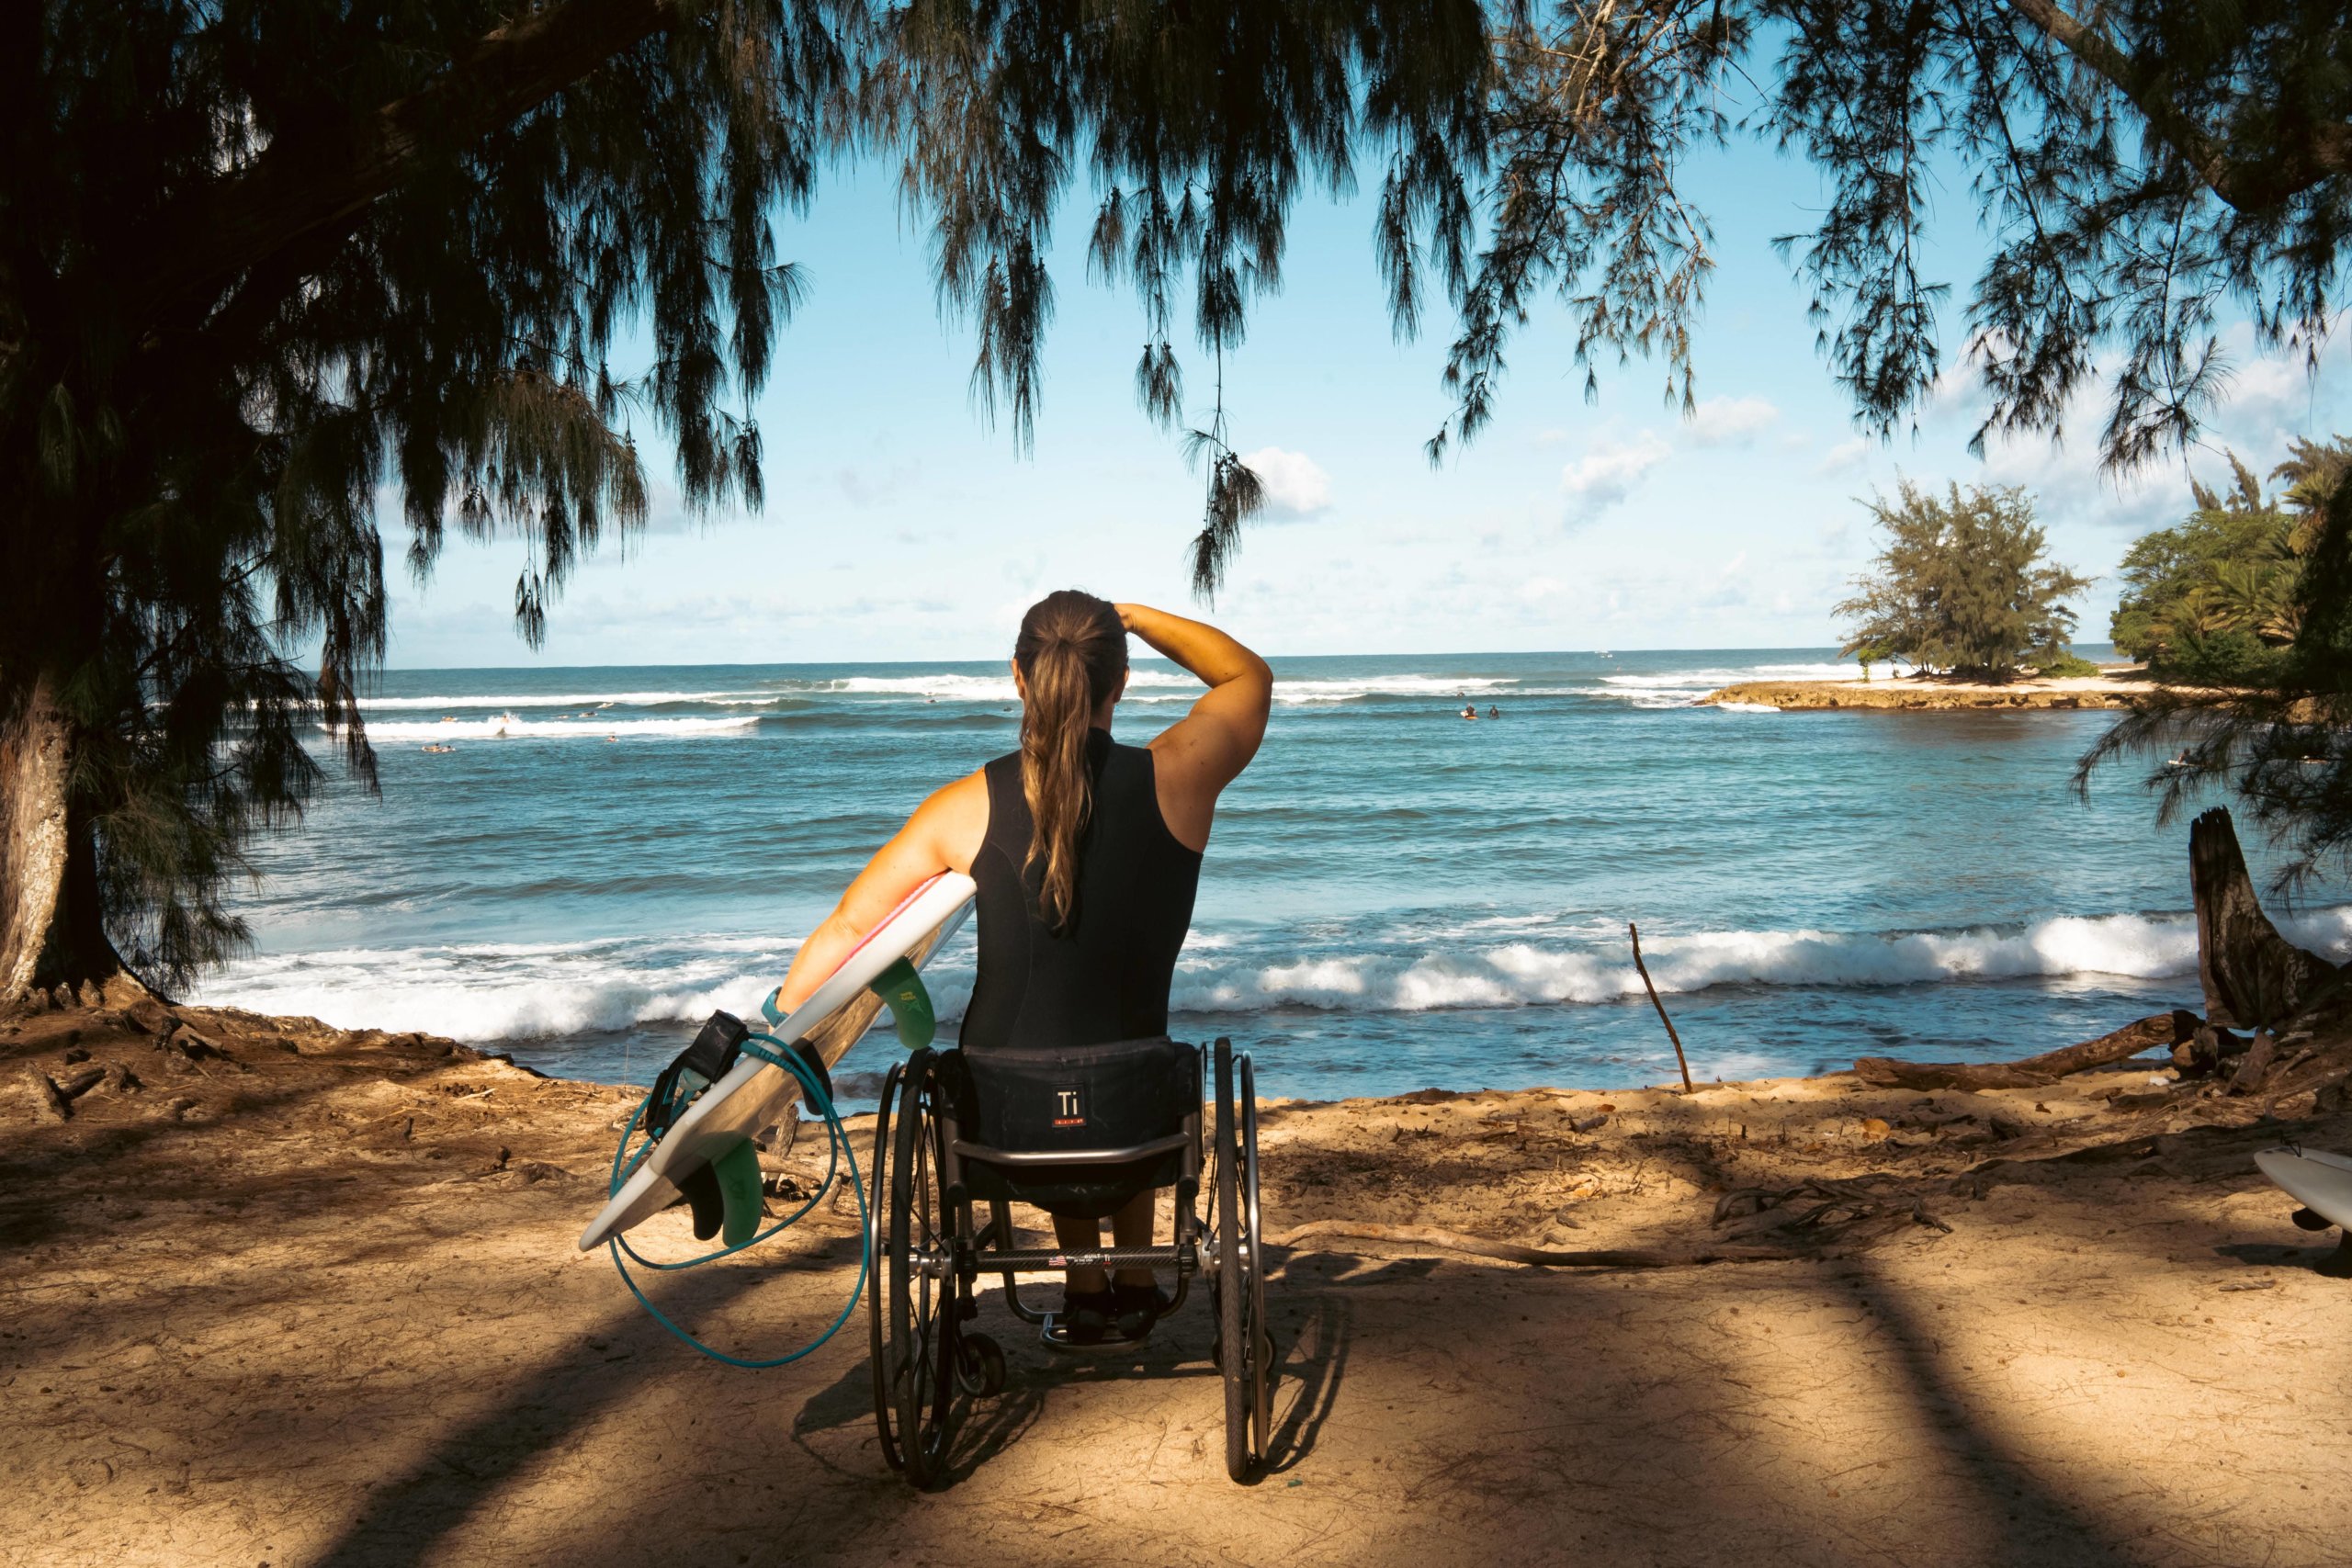 Victoria Feige on beach in her wheelchair with her surfboard